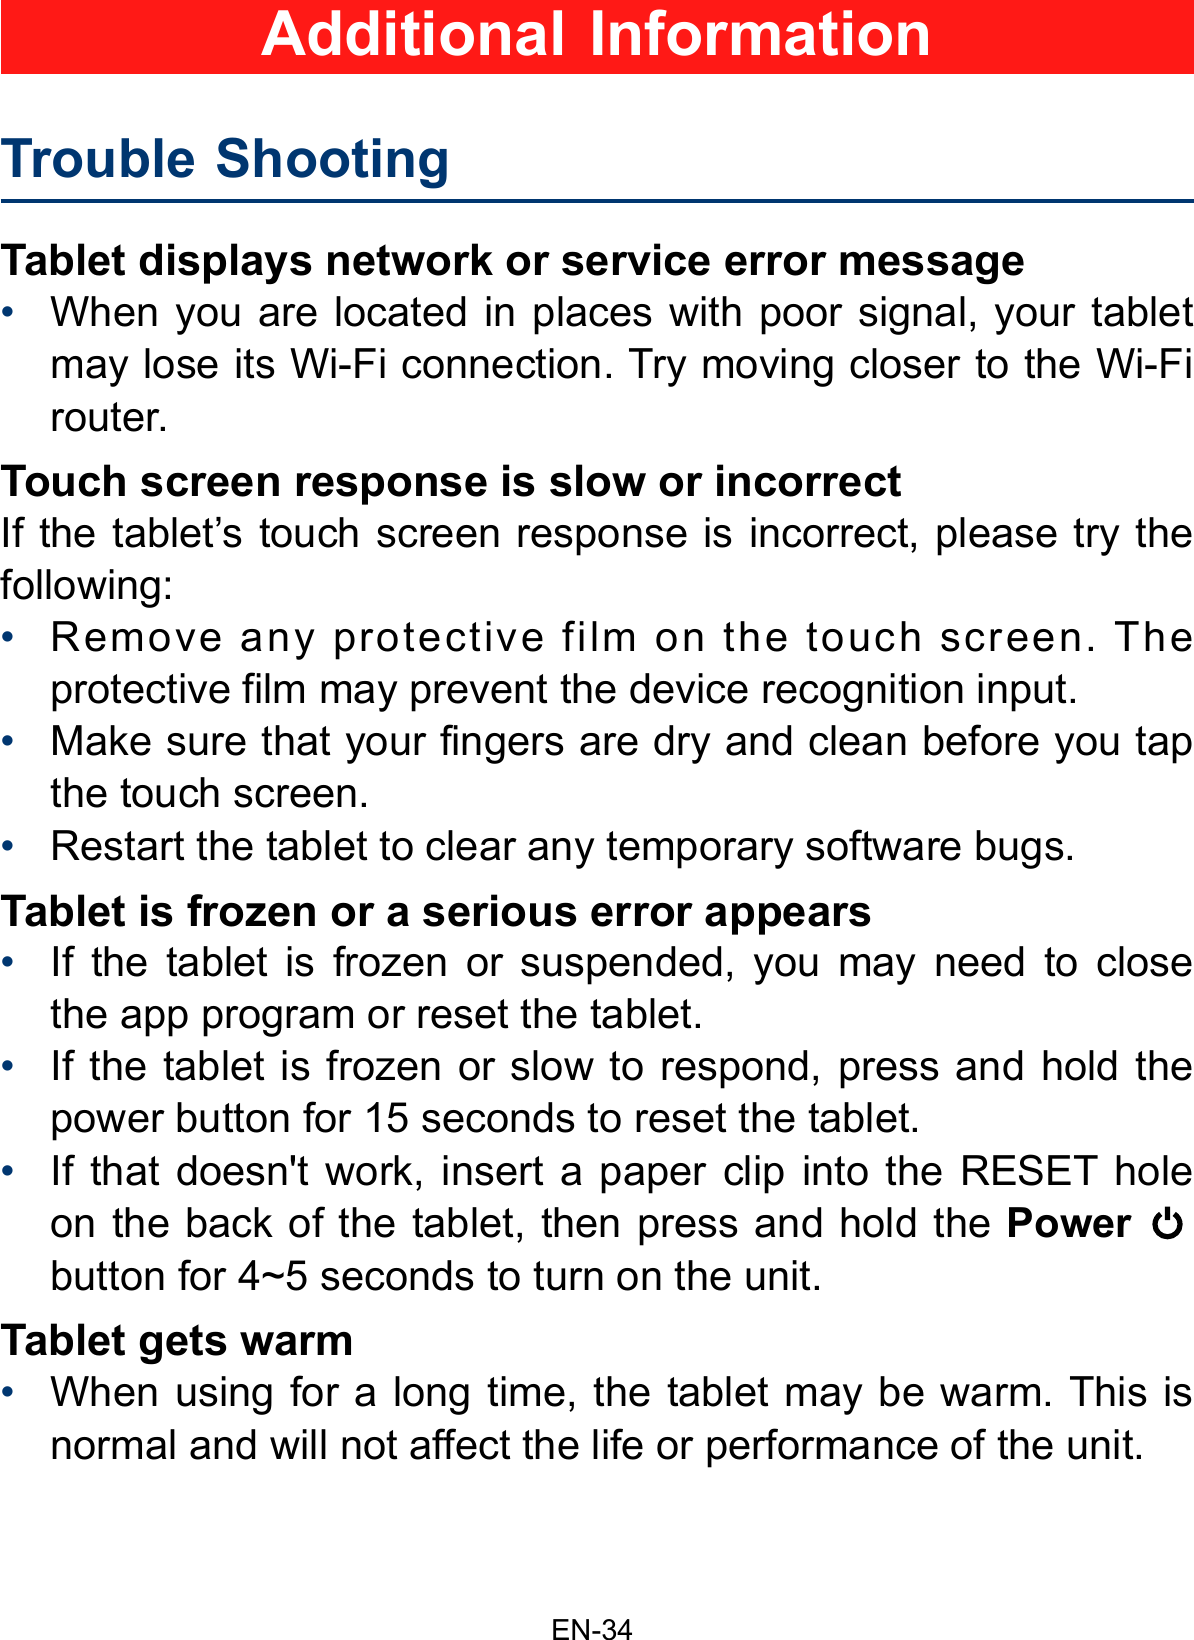 EN-34Tablet displays network or service error message•When you are located in places with poor signal, your tabletmay lose its Wi-Fi connection. Try moving closer to the Wi-Firouter.Touch screen response is slow or incorrectIf the tablet’s touch screen response is incorrect, please try the following:•Remove any protective film on the touch screen. Theprotective film may prevent the device recognition input.•Make sure that your fingers are dry and clean before you tapthe touch screen.•Restart the tablet to clear any temporary software bugs.Tablet is frozen or a serious error appears•If the tablet is frozen or suspended, you may need to closethe app program or reset the tablet.•If the tablet is frozen or slow to respond, press and hold thepower button for 15 seconds to reset the tablet.•If that doesn&apos;t work, insert a paper clip into the RESET holeon the back of the tablet, then press and hold the Powerbutton for 4~5 seconds to turn on the unit.Tablet gets warm•When using for a long time, the tablet may be warm. This isnormal and will not affect the life or performance of the unit.Trouble Shooting   Additional Information